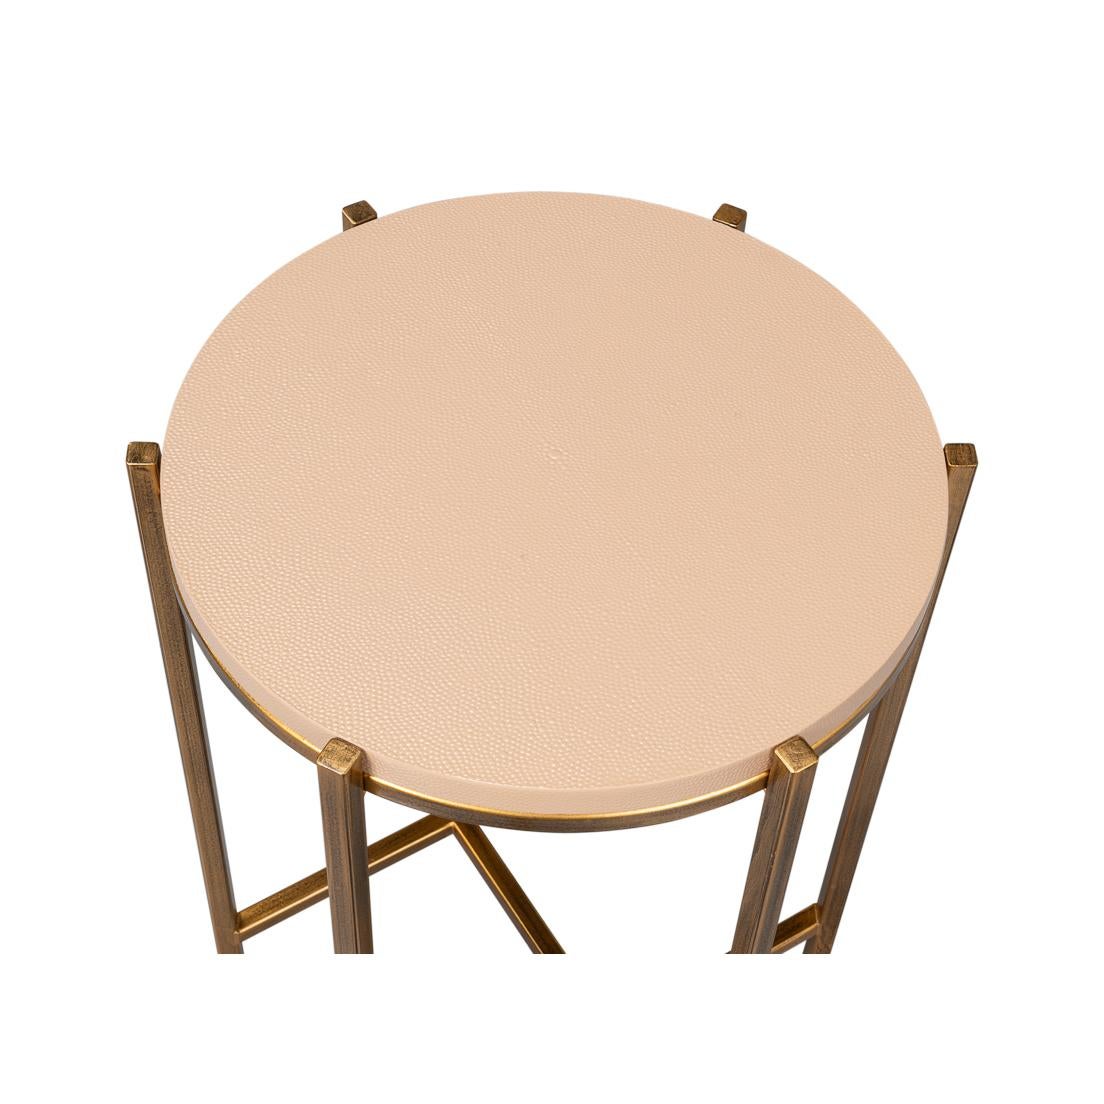 Asian Modern Taupe Leather Top Accent Table For Sale